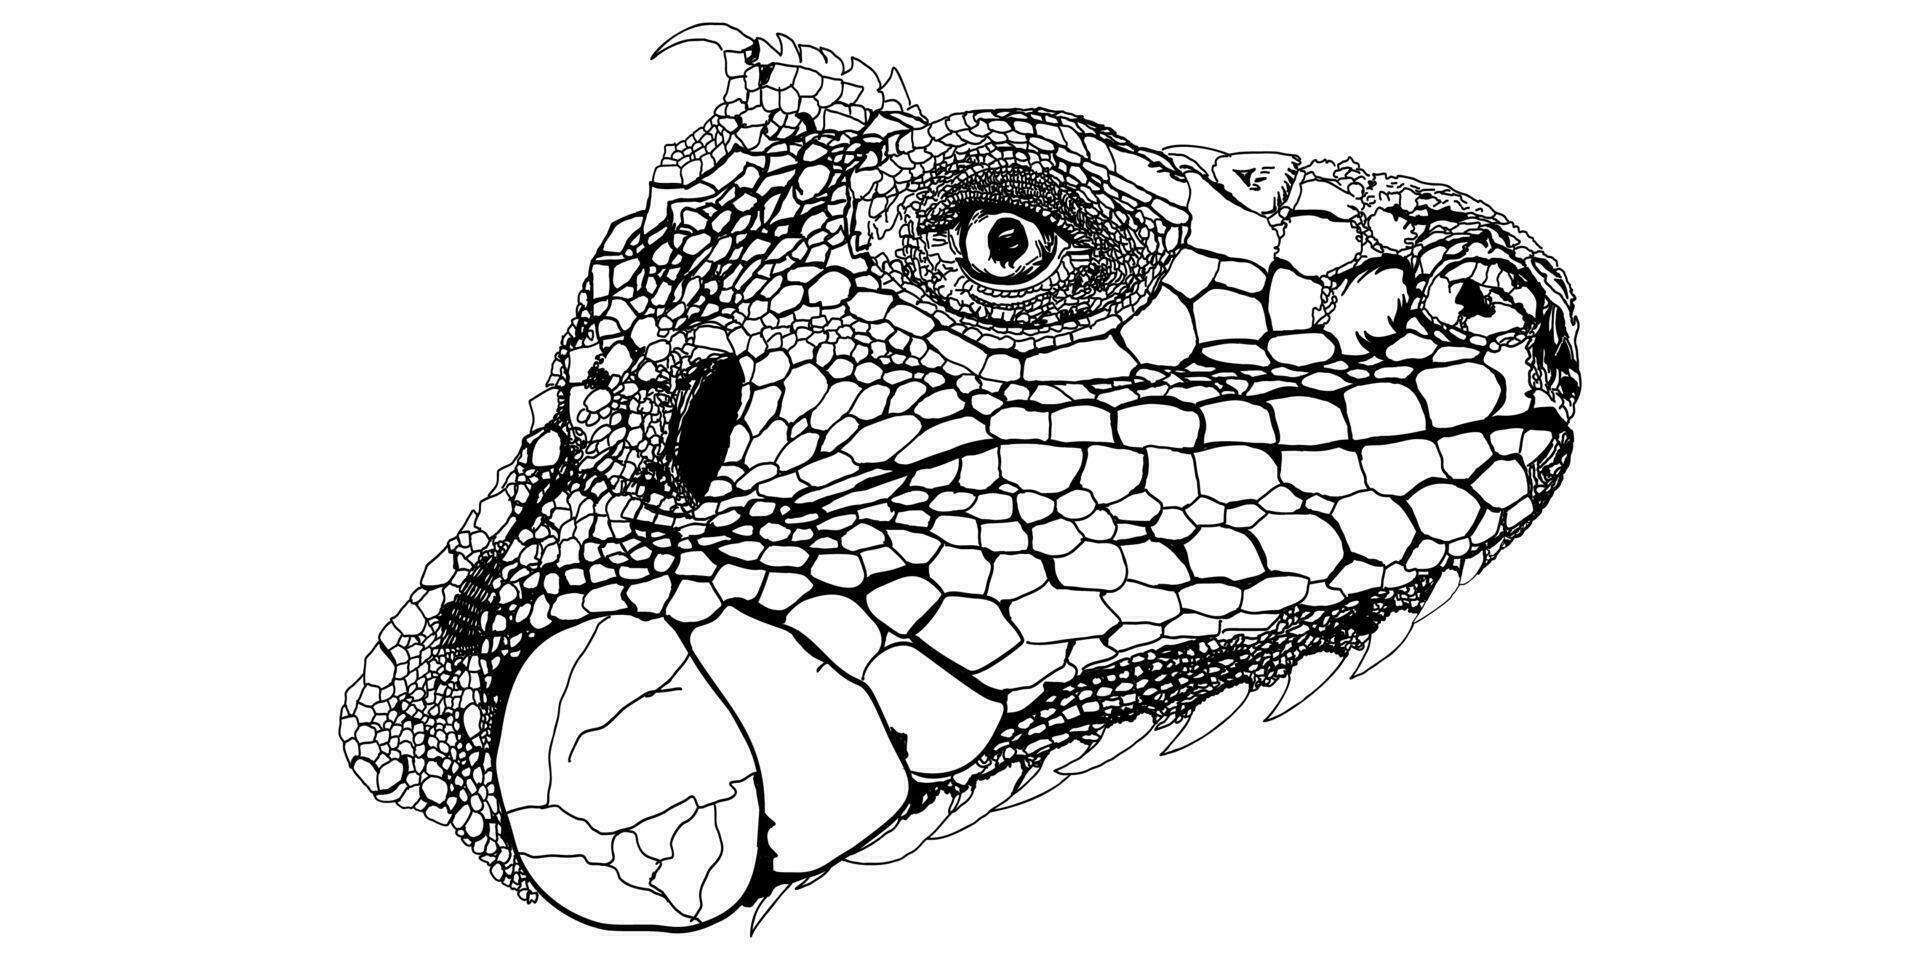 Iguana Sketch Head Vector Graphics Black and White Drawing Pen Ink Monochrome Illustration